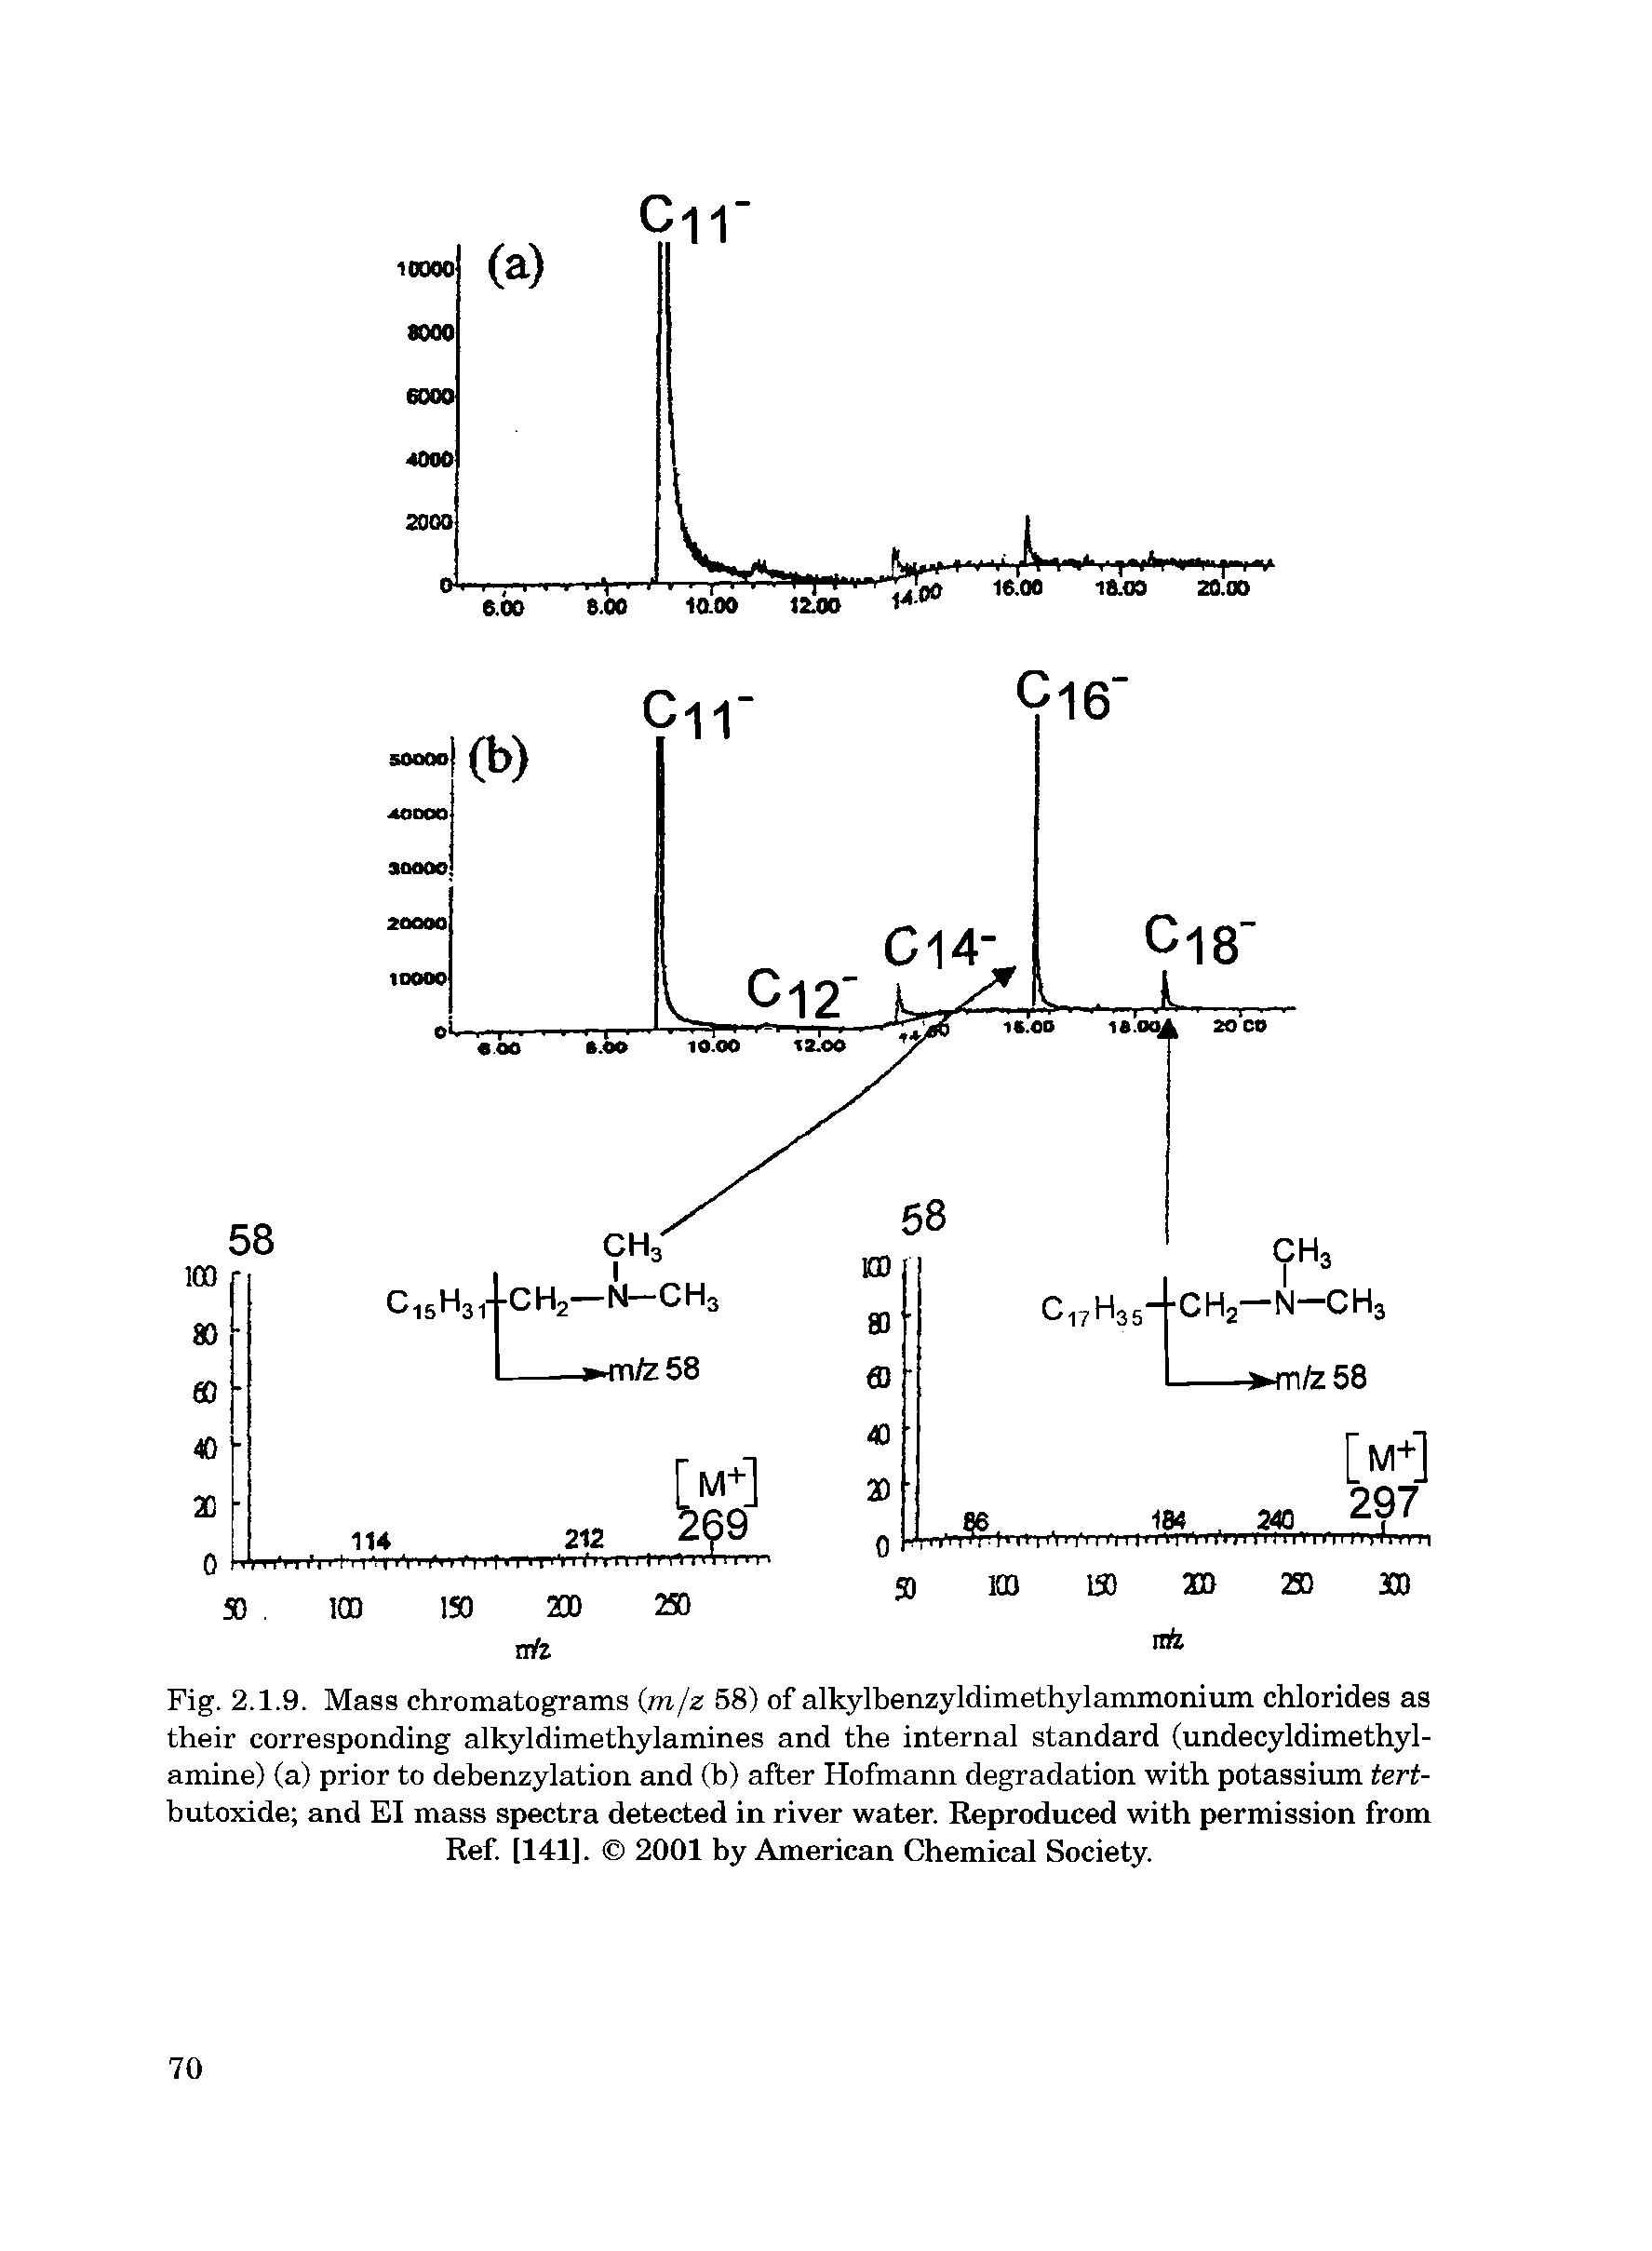 Fig. 2.1.9. Mass chromatograms (m/z 58) of alkylbenzyldimethylammonium chlorides as their corresponding alkyldimethylamines and the internal standard (undecyldimethyl-amine) (a) prior to debenzylation and (b) after Hofmann degradation with potassium tert-butoxide and El mass spectra detected in river water. Reproduced with permission from Ref. [141]. 2001 by American Chemical Society.